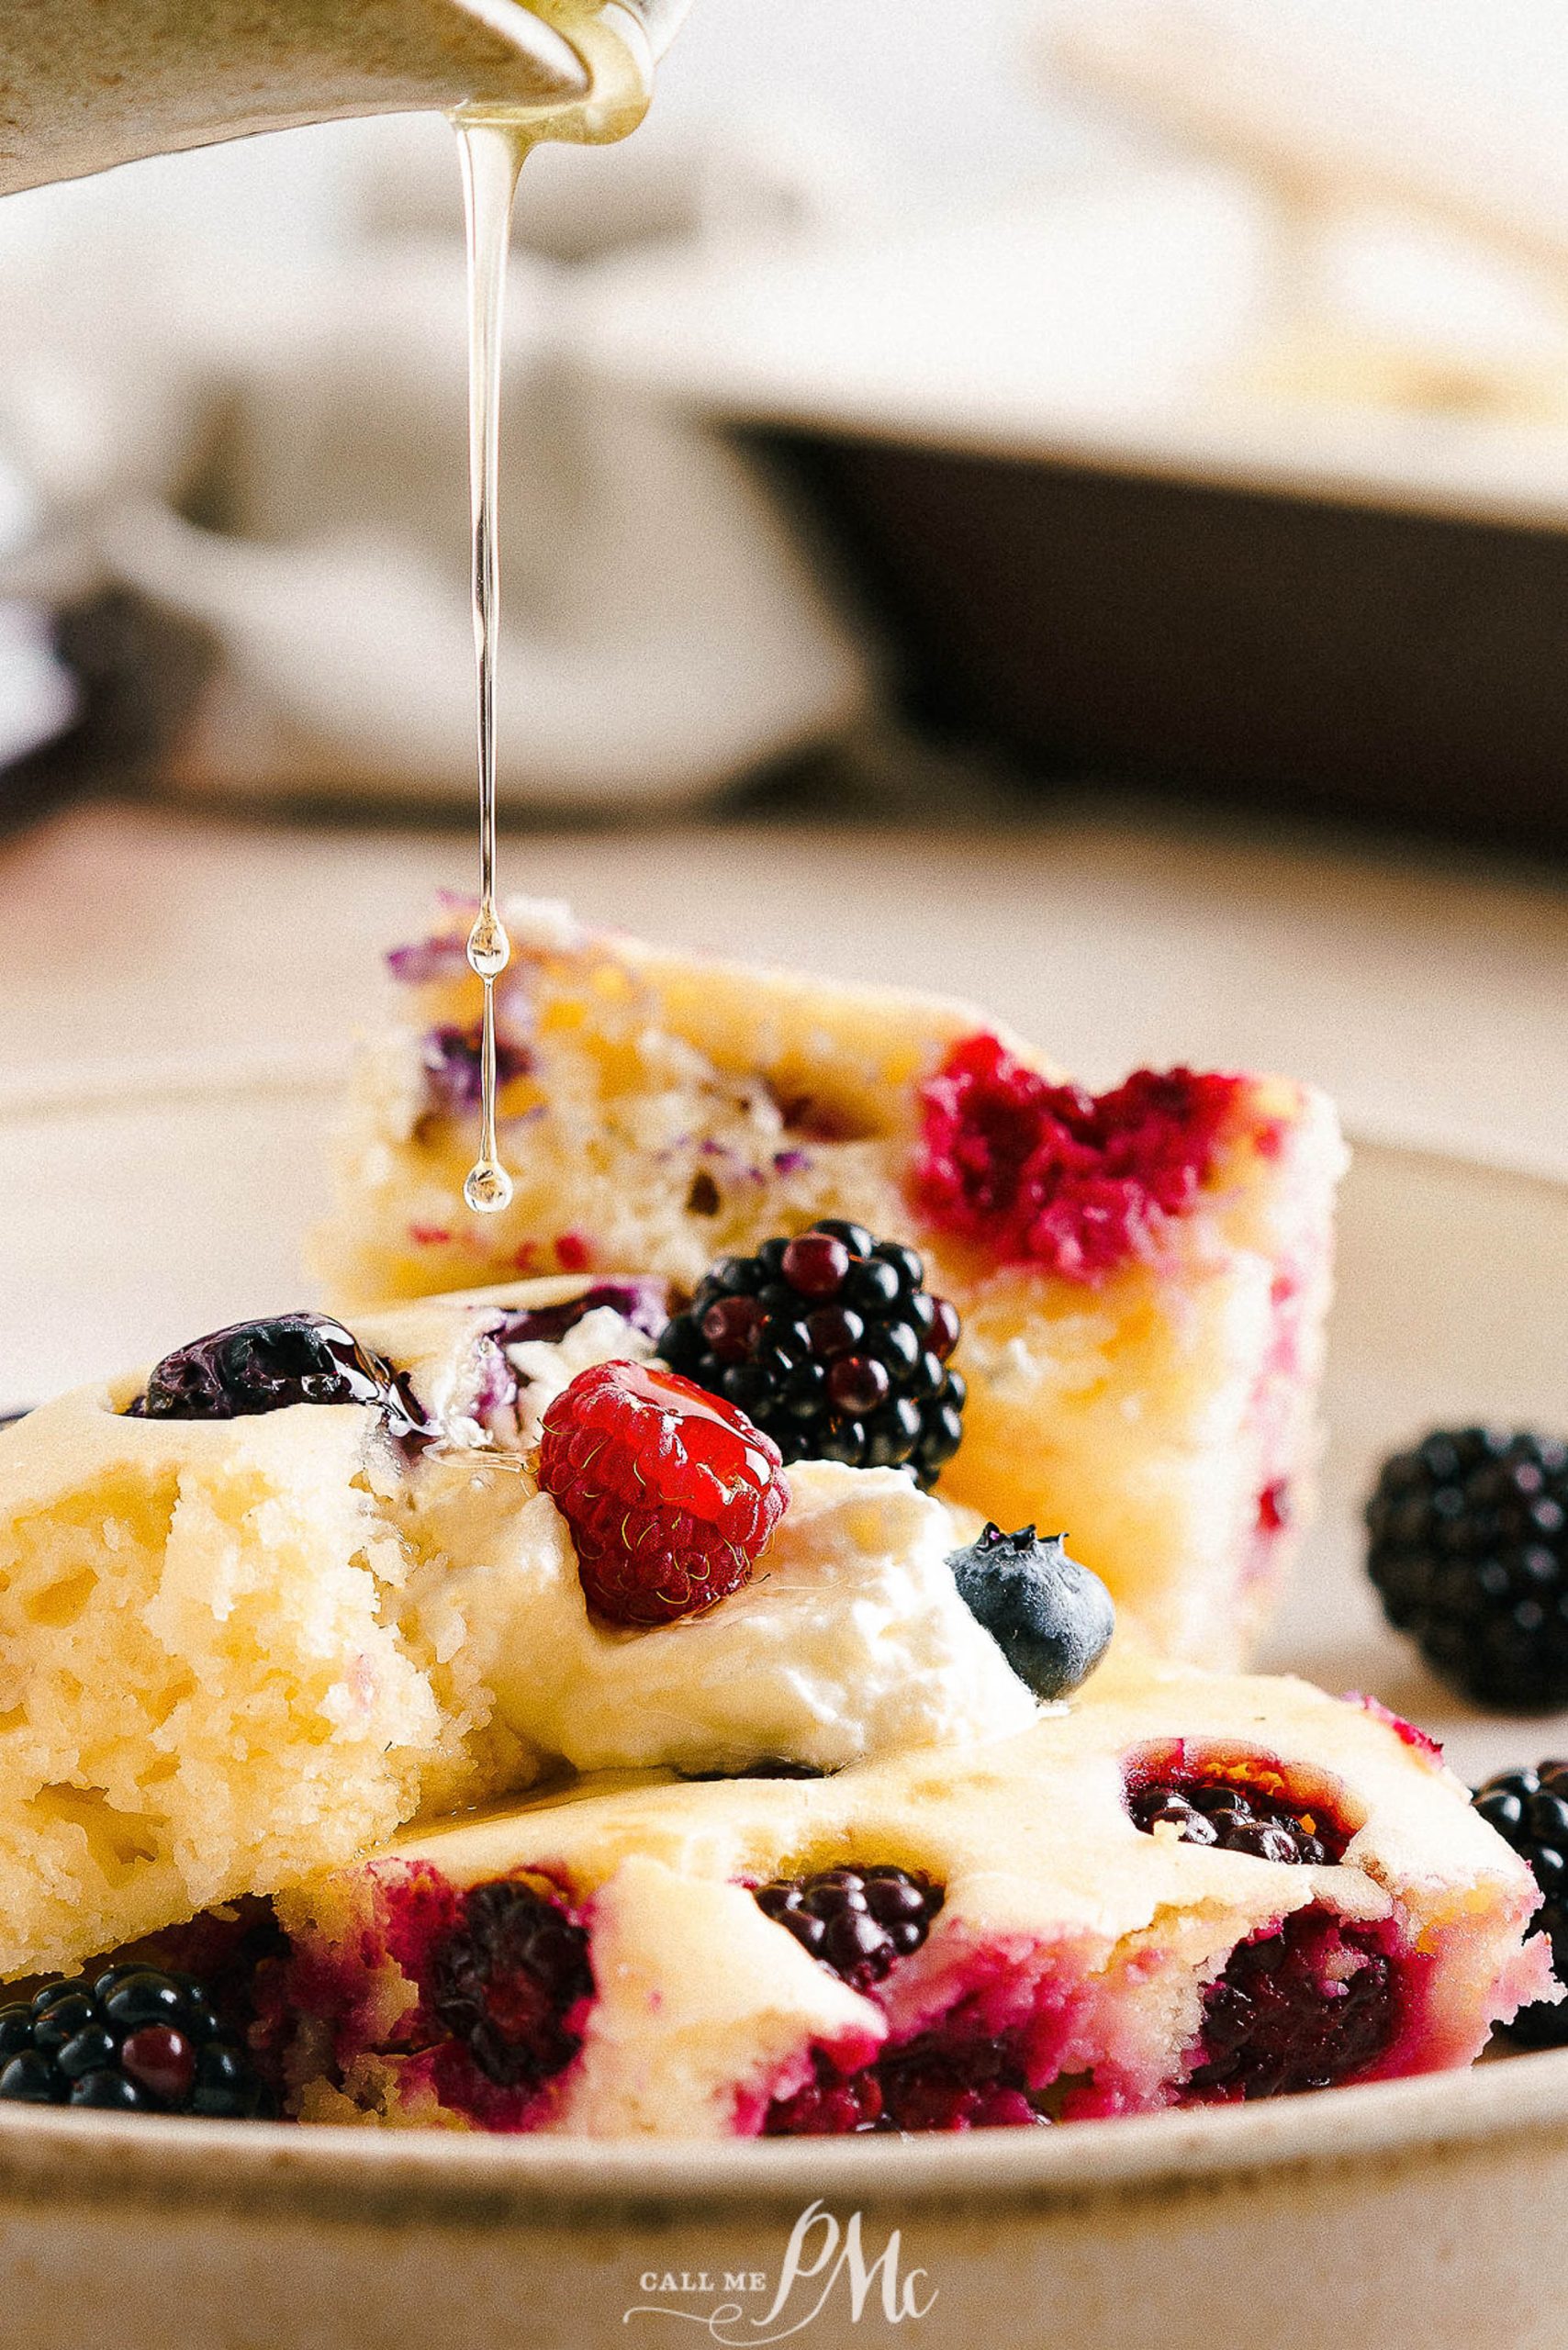 A slice of sheet pan pancakes with berries being drizzled with honey.